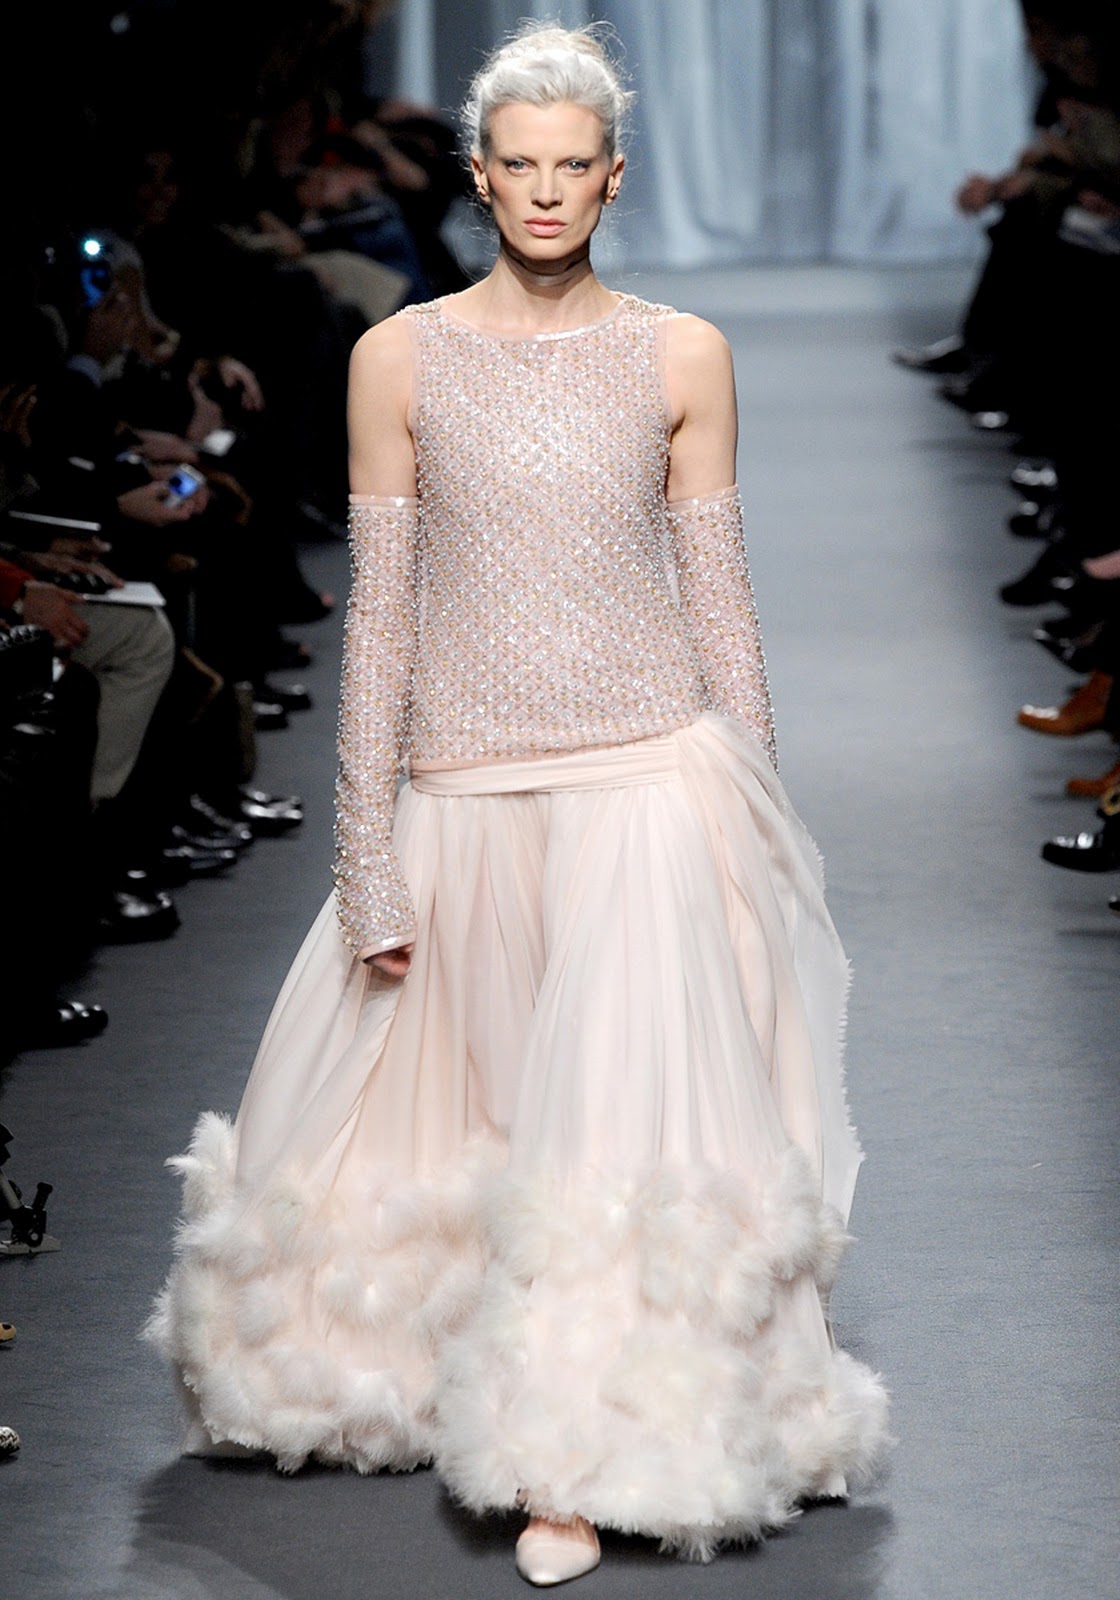 ANDREA JANKE Finest Accessories: Pearl by Pearl  CHANEL Spring 2011  Haute Couture